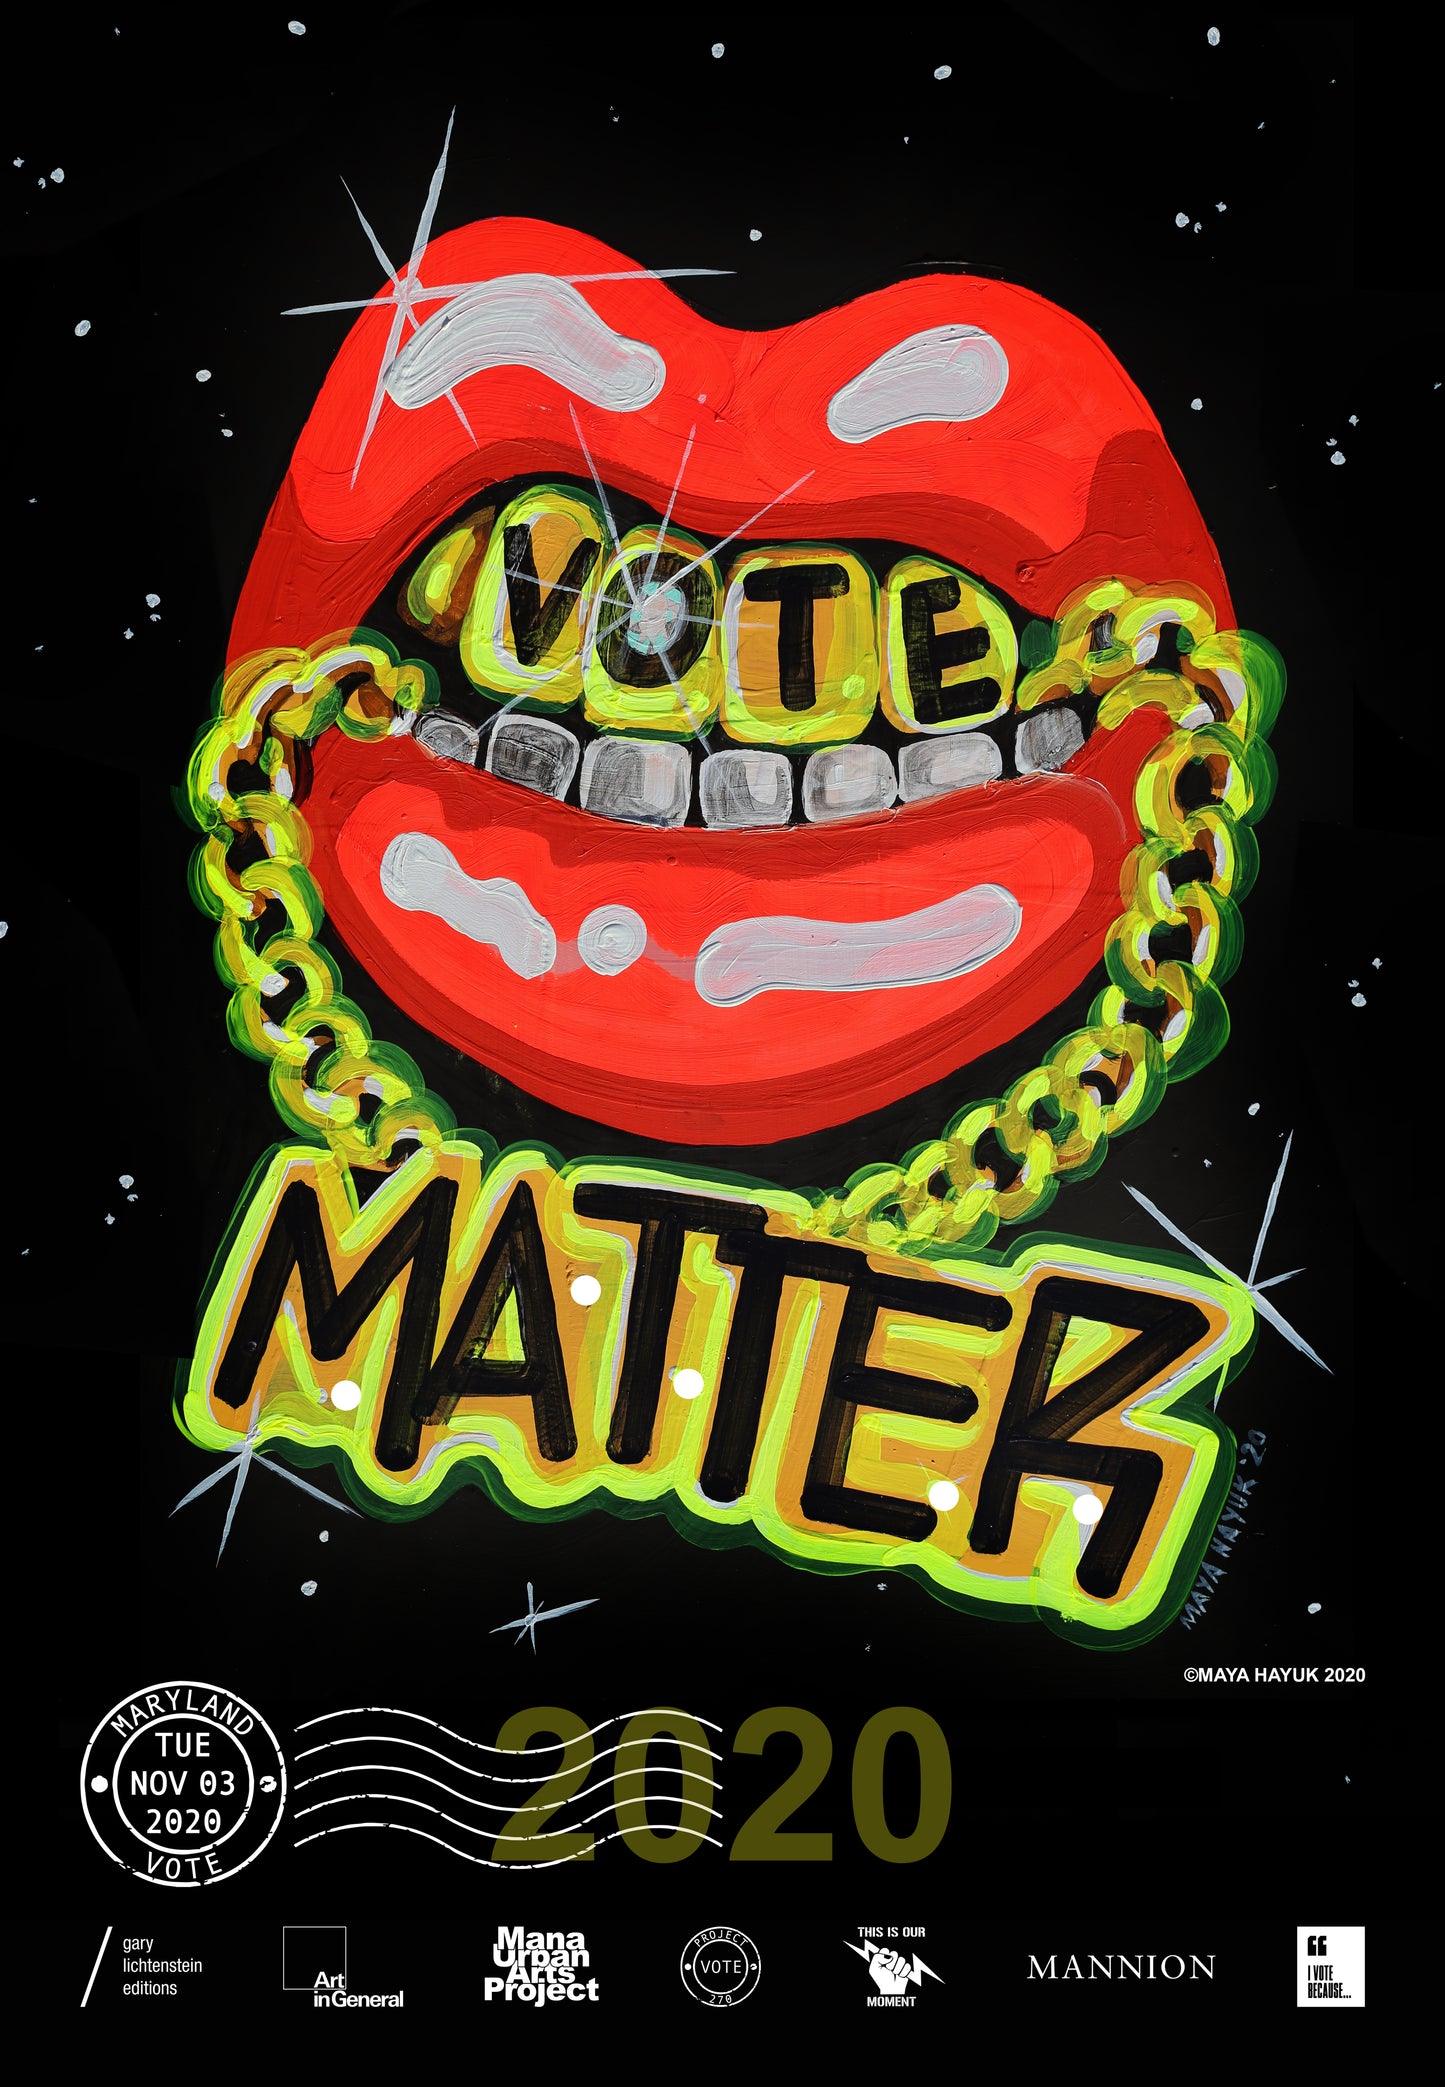 Maryland Get Out The Vote Poster by Maya Hayuk